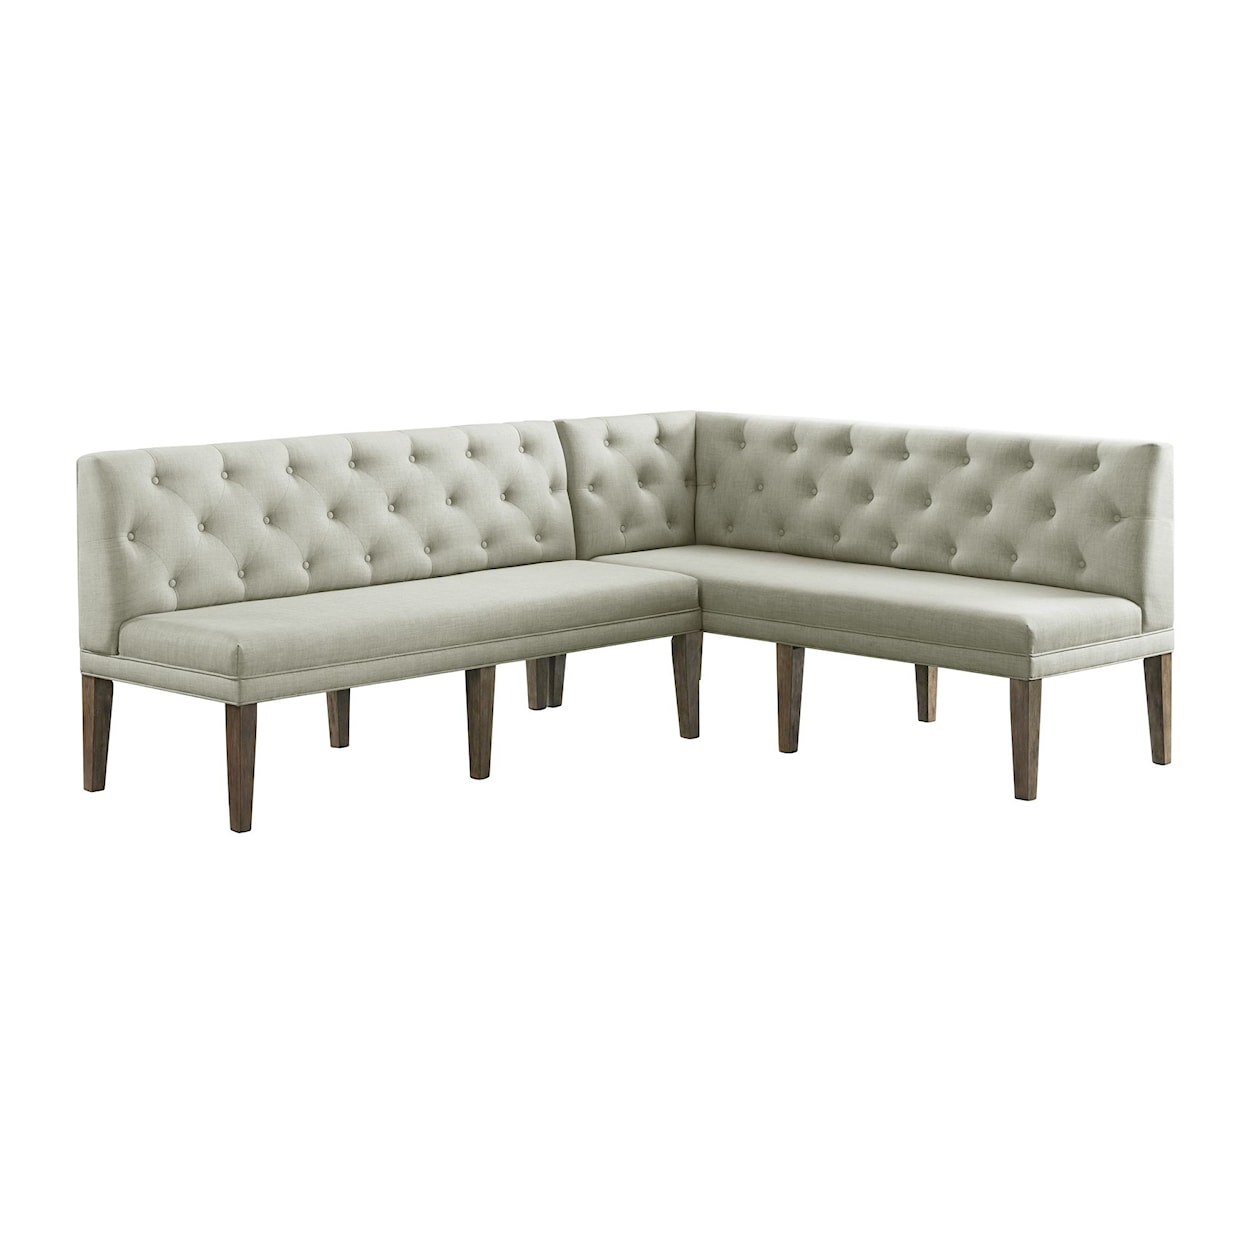 Elements Peyton Sectional Dining Bench